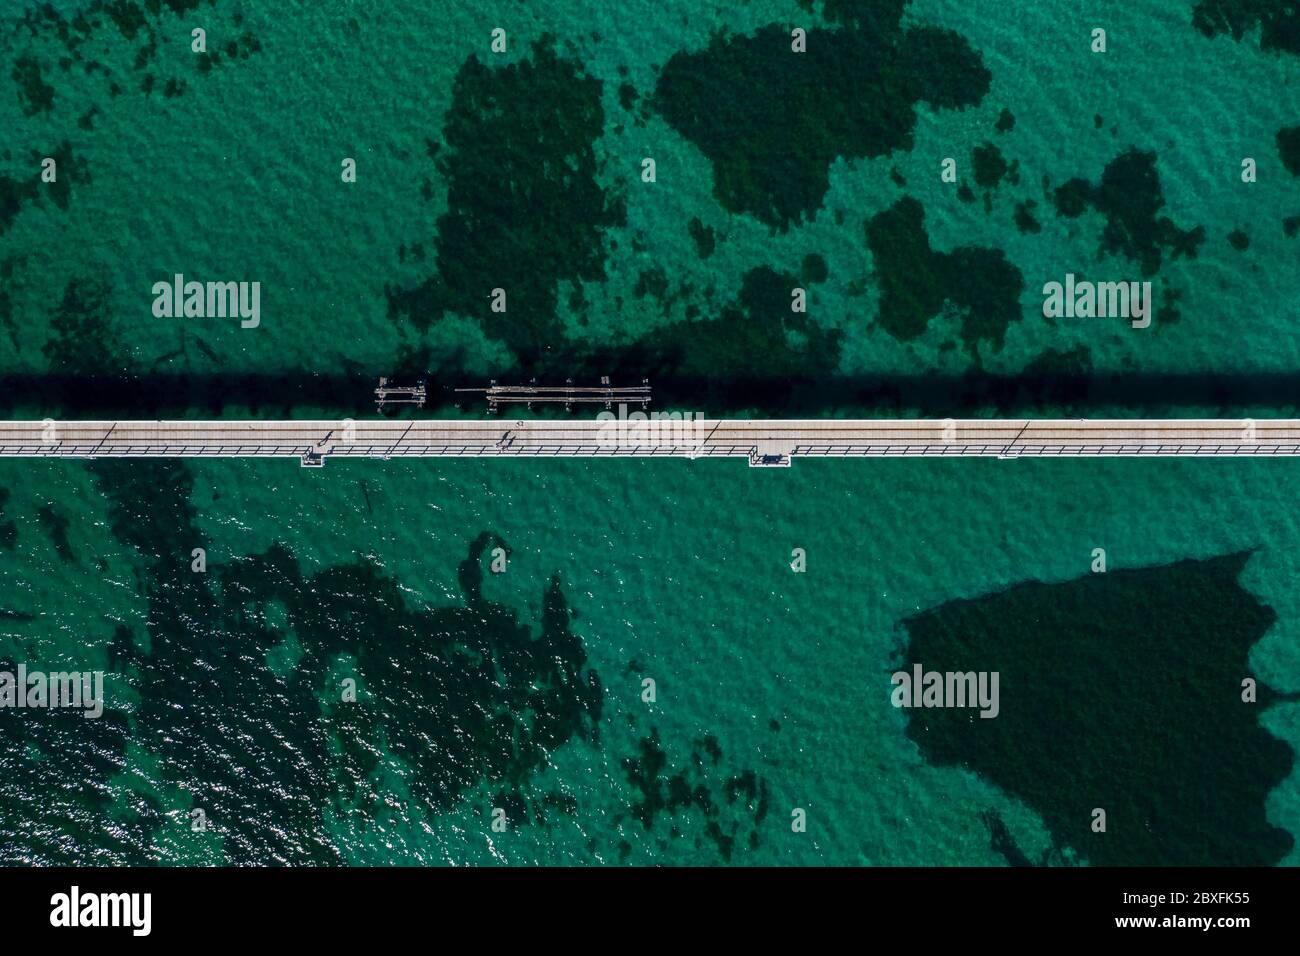 Overhead view of Busselton pier, the worlds longest wooden structure; Busselton is 220km south west of Perth in Western Australia Stock Photo